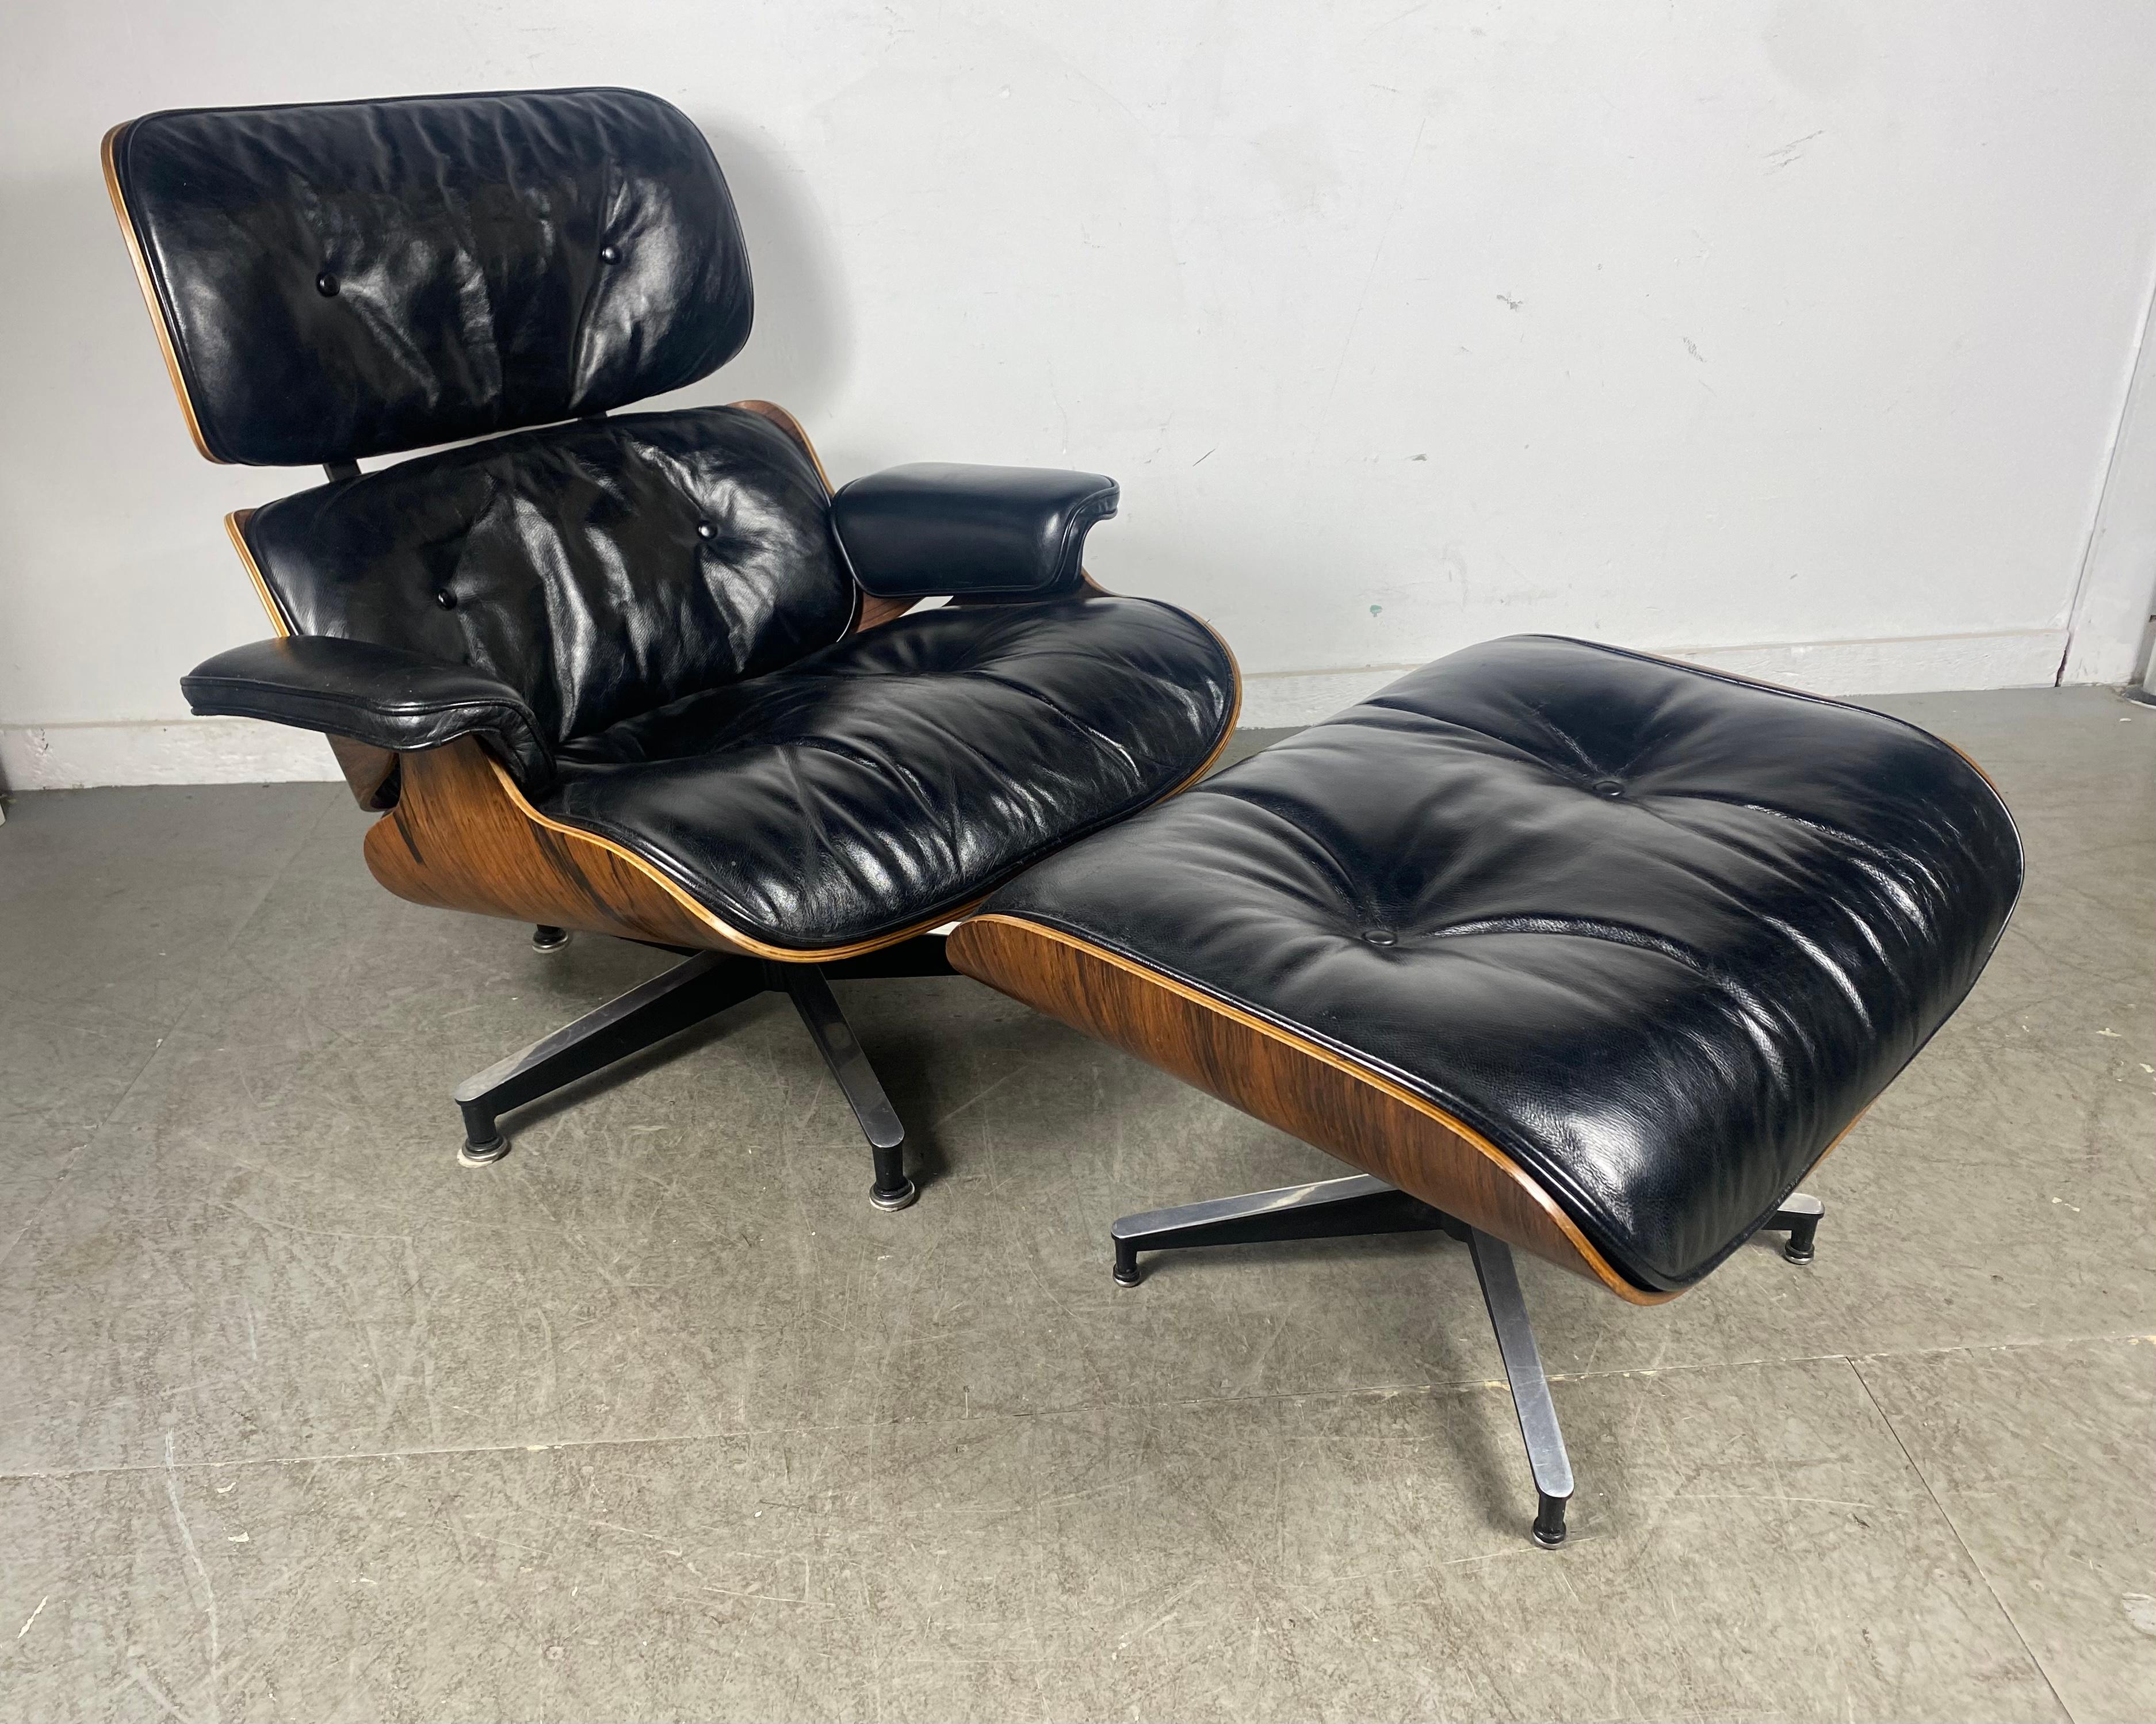 Rare 2nd Generation Brazilian Rosewood and black leather lounge chair and ottoman by Charles Eames,, Stunning richly grained rosewood,Retains original early white medallion label.. condition of shell and leather is definitely the nicest I have ever